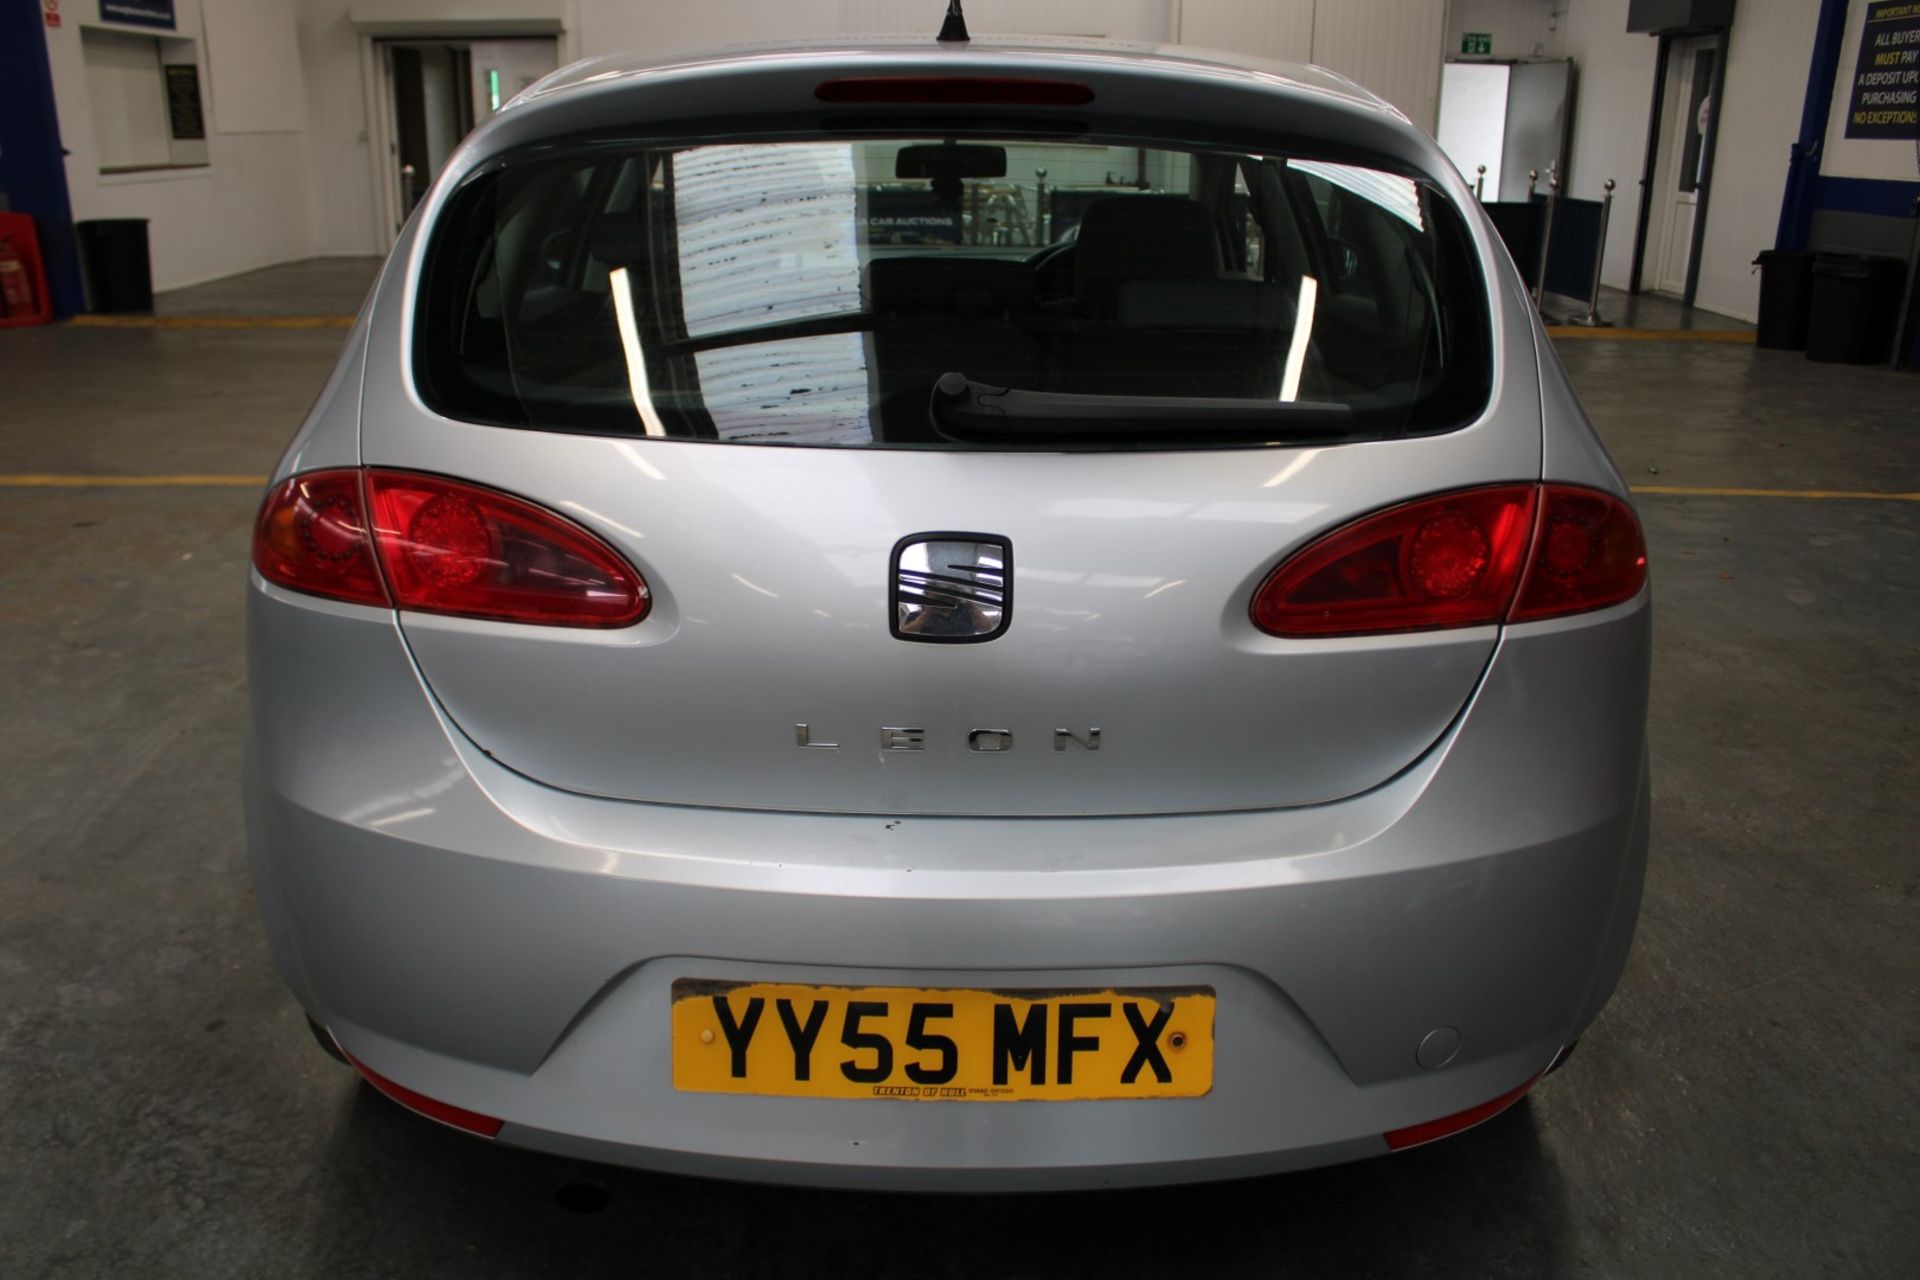 55 05 Seat Leon Reference - Image 28 of 32